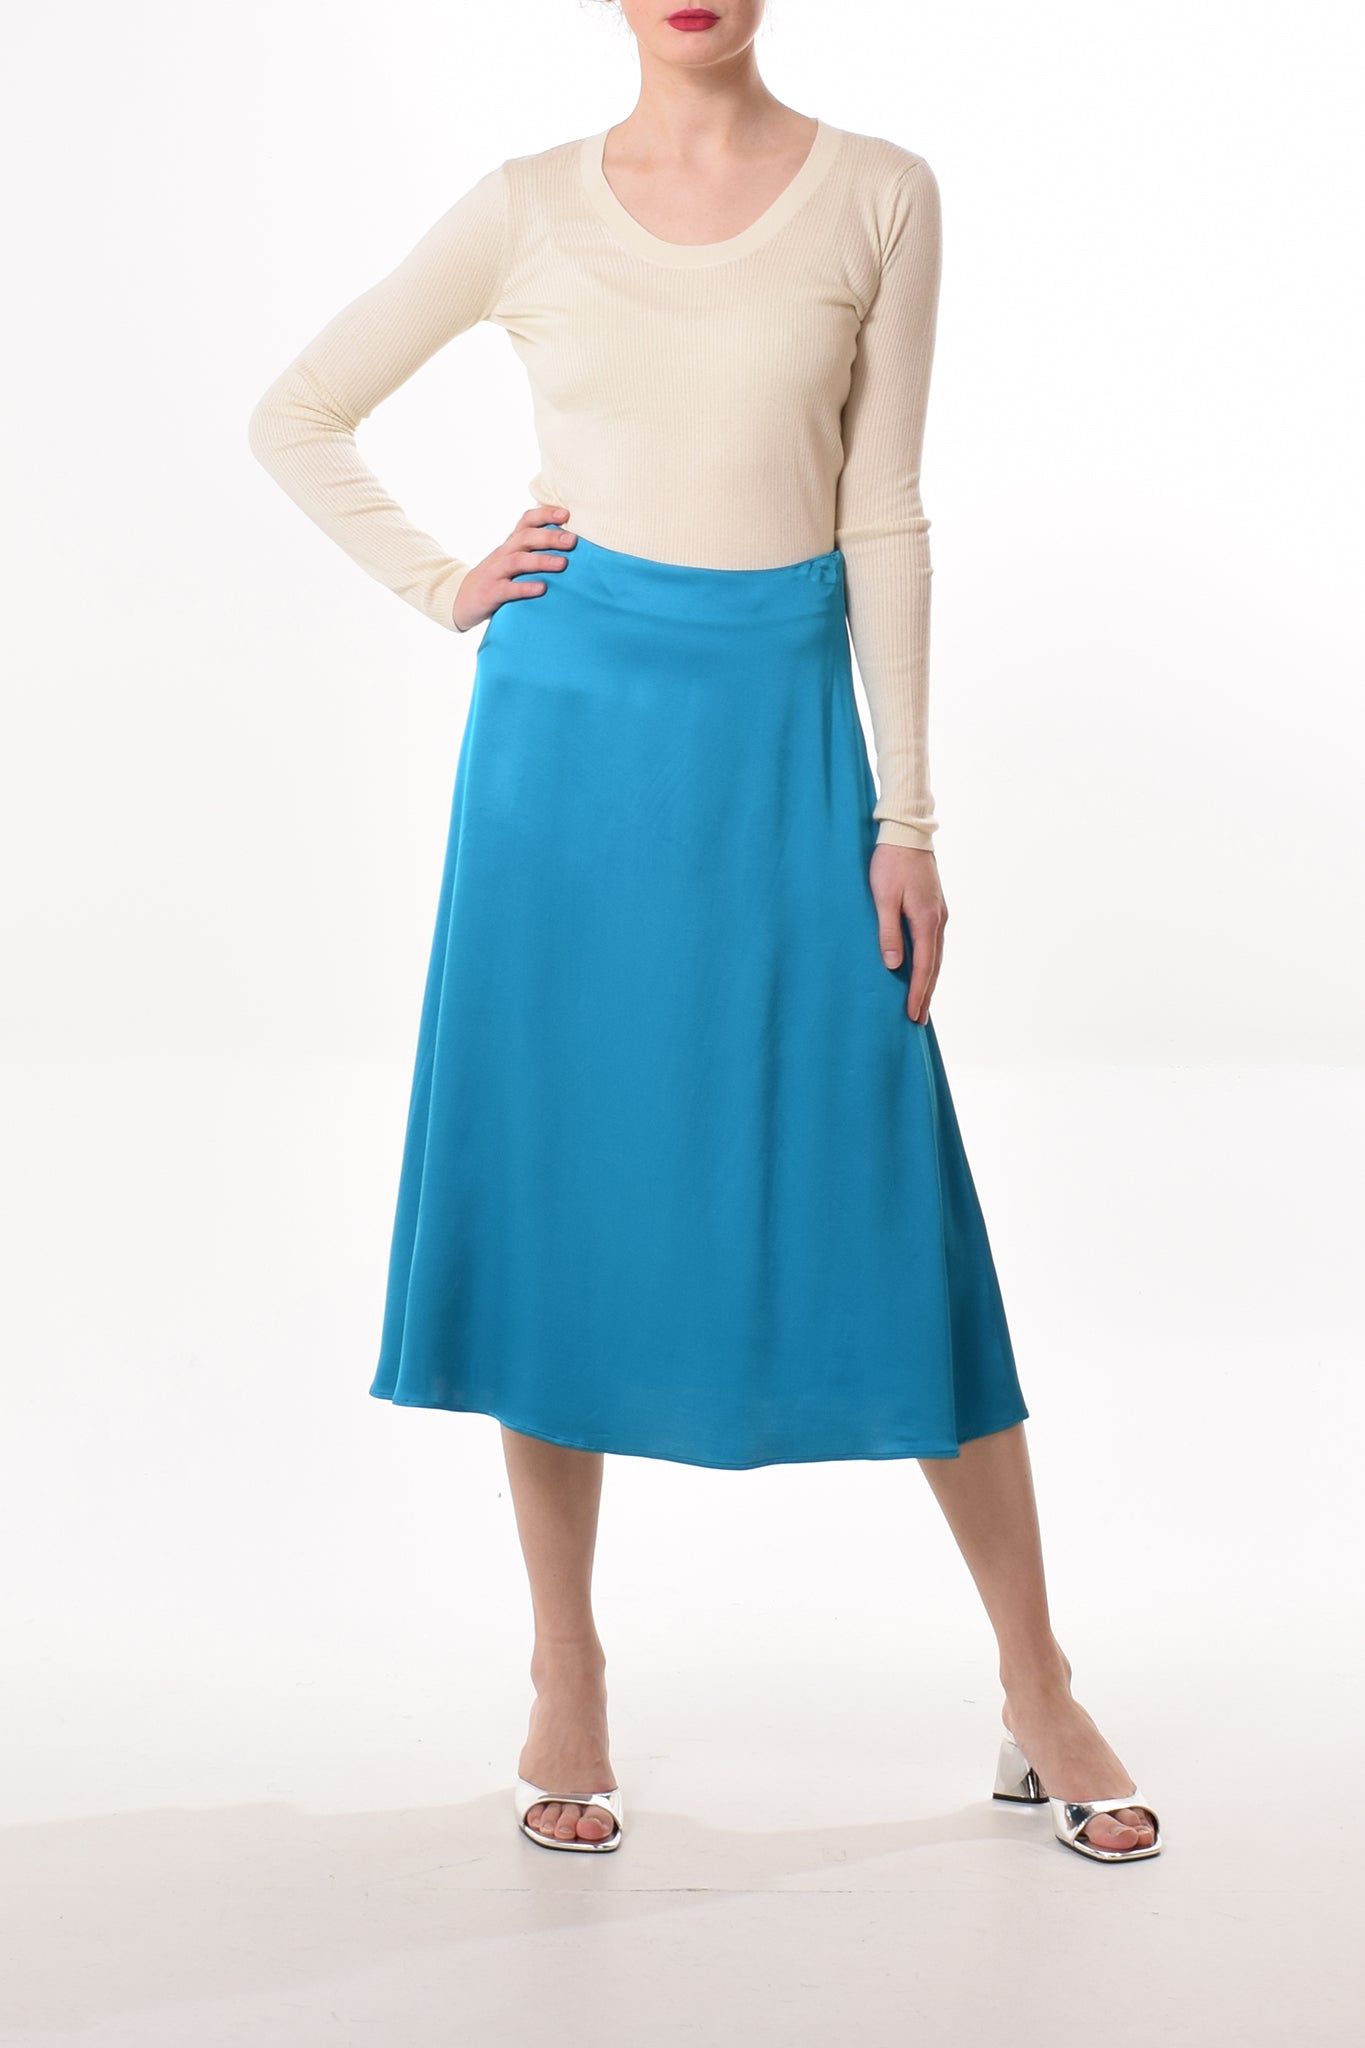 Fez skirt in Pacific